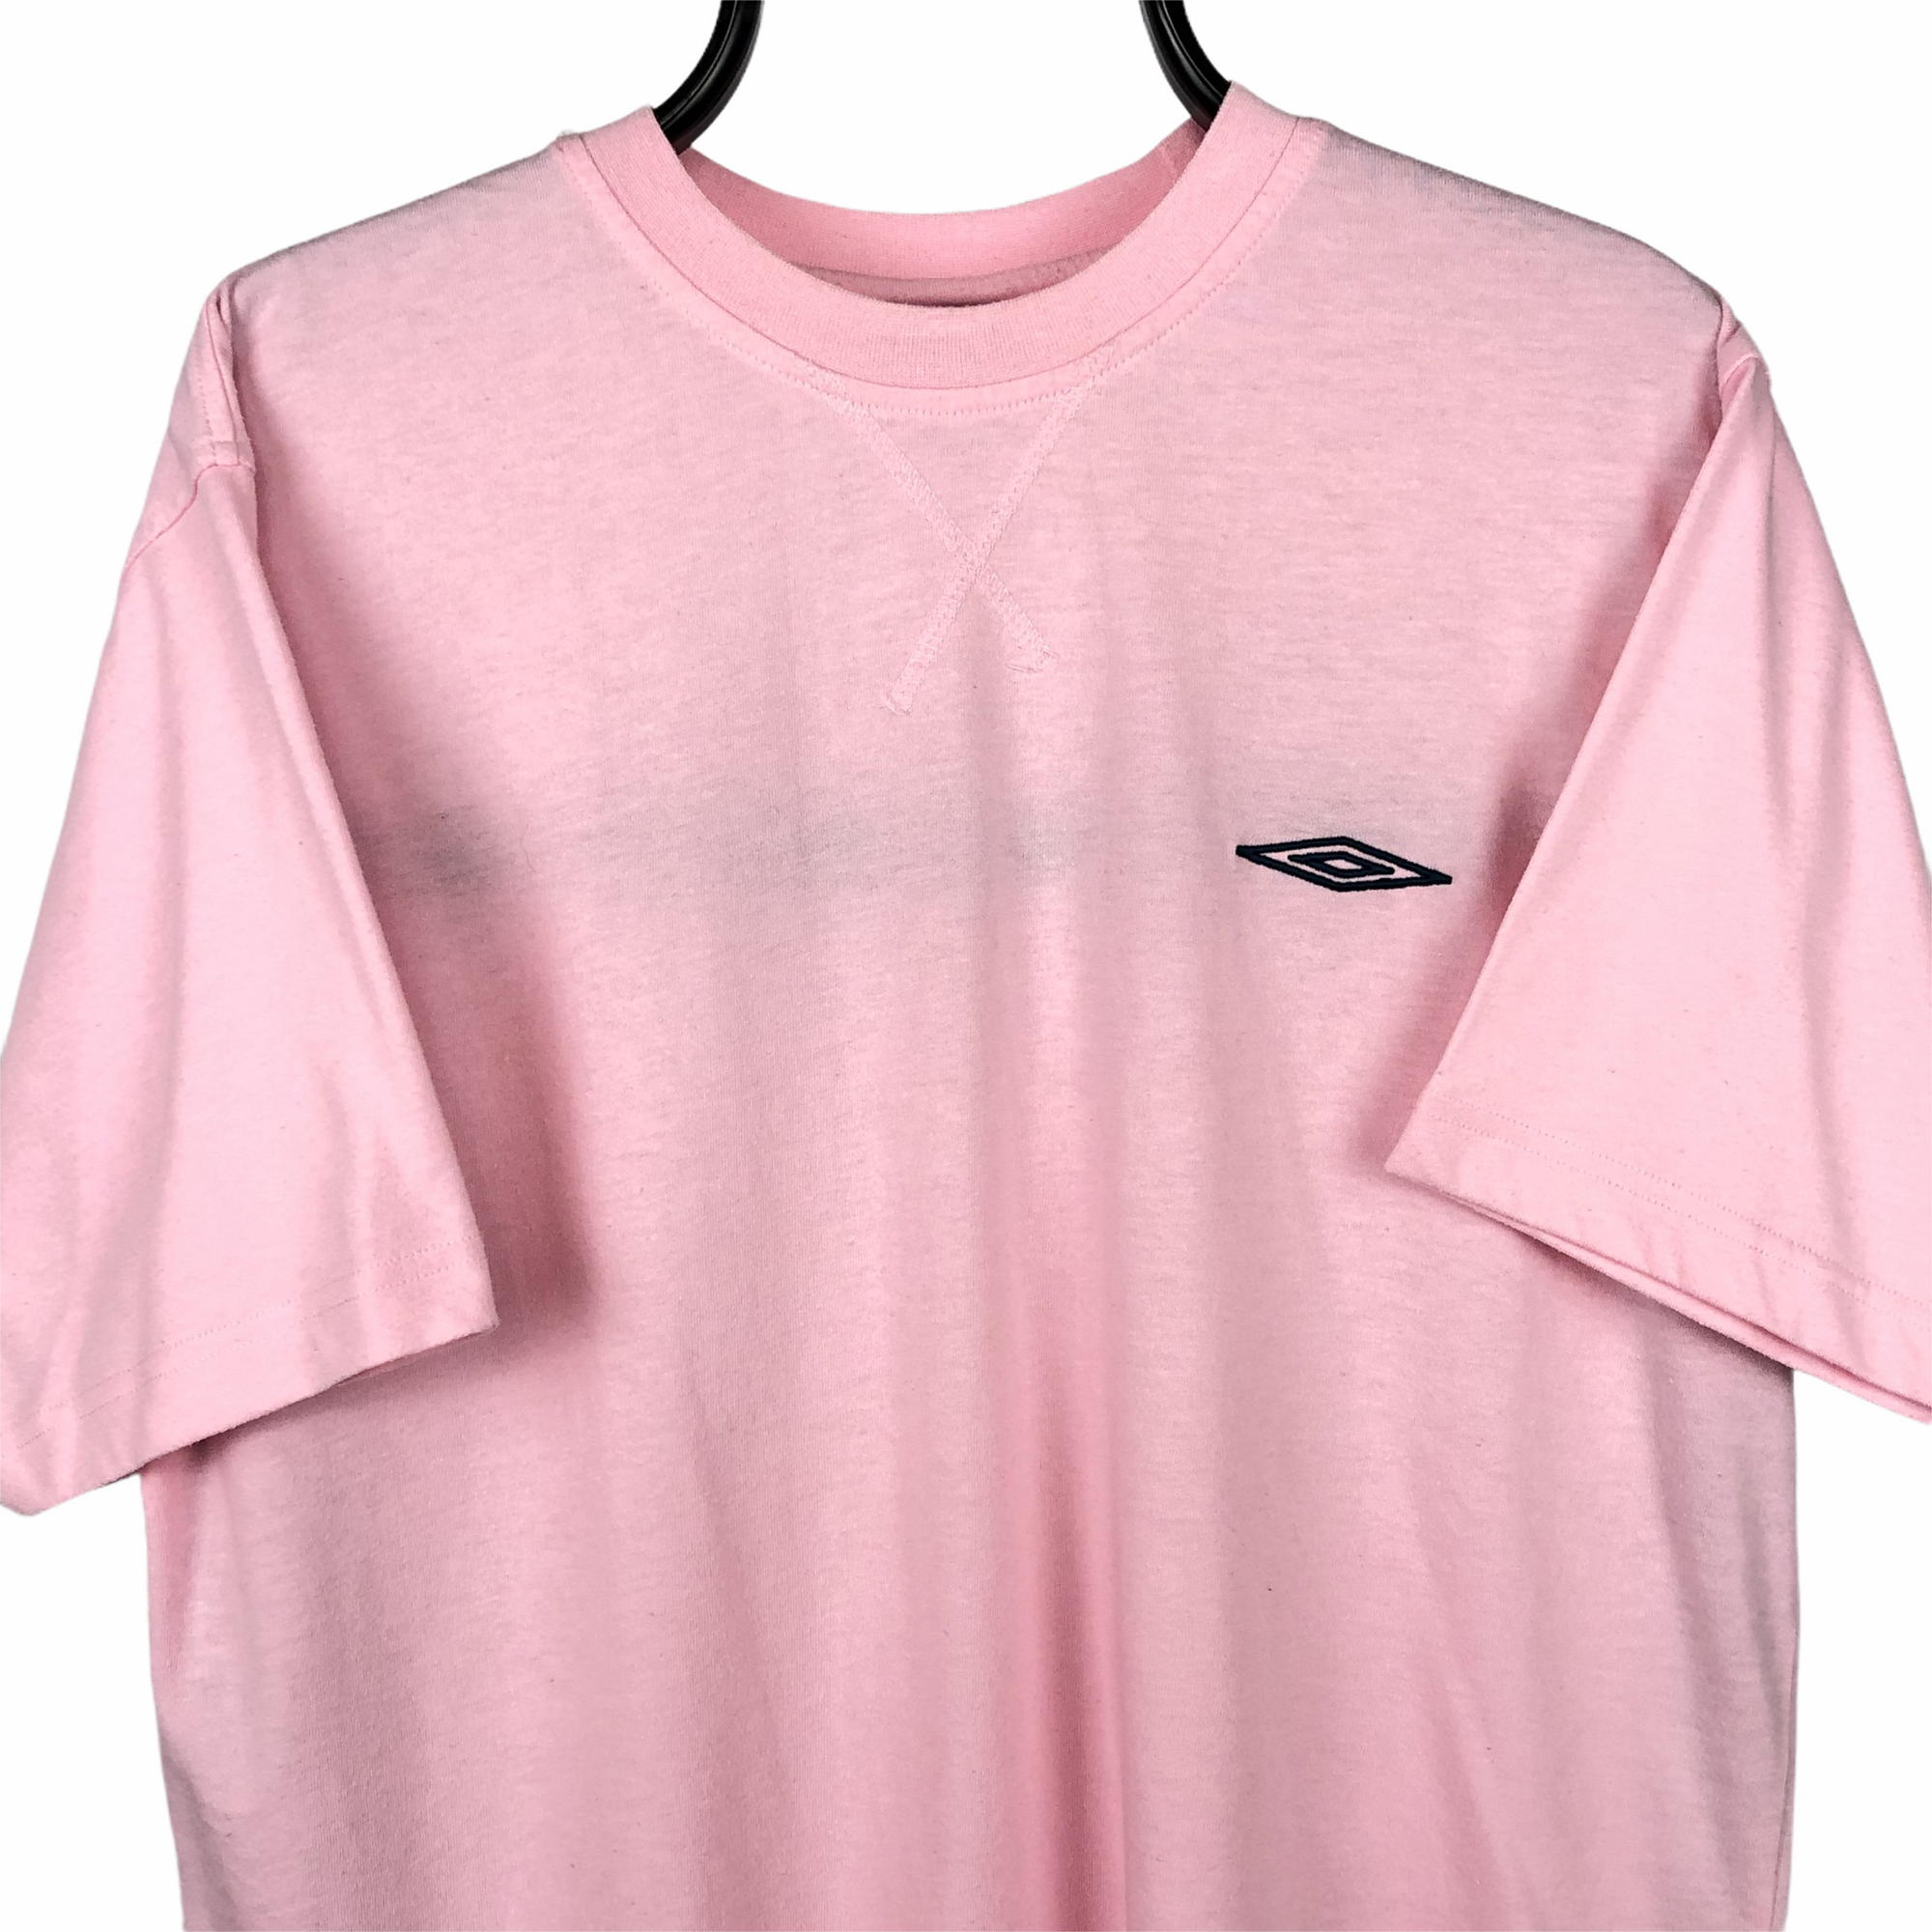 Vintage Umbro Embroidered Small Logo Tee in Pink - Men's Large/Women's XL